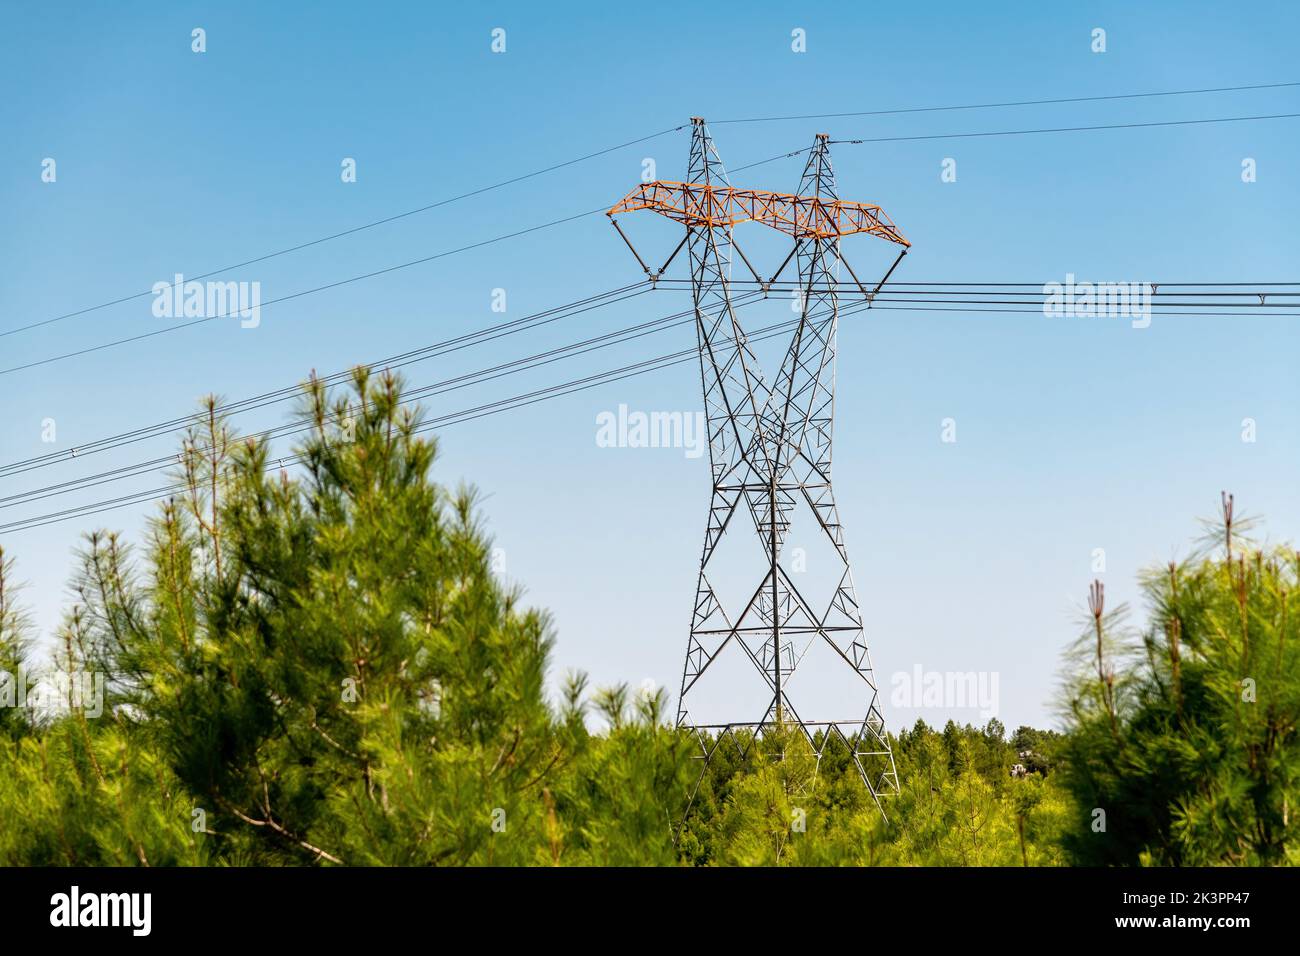 Electric power poles High voltage electrical power poles along a national highway Stock Photo